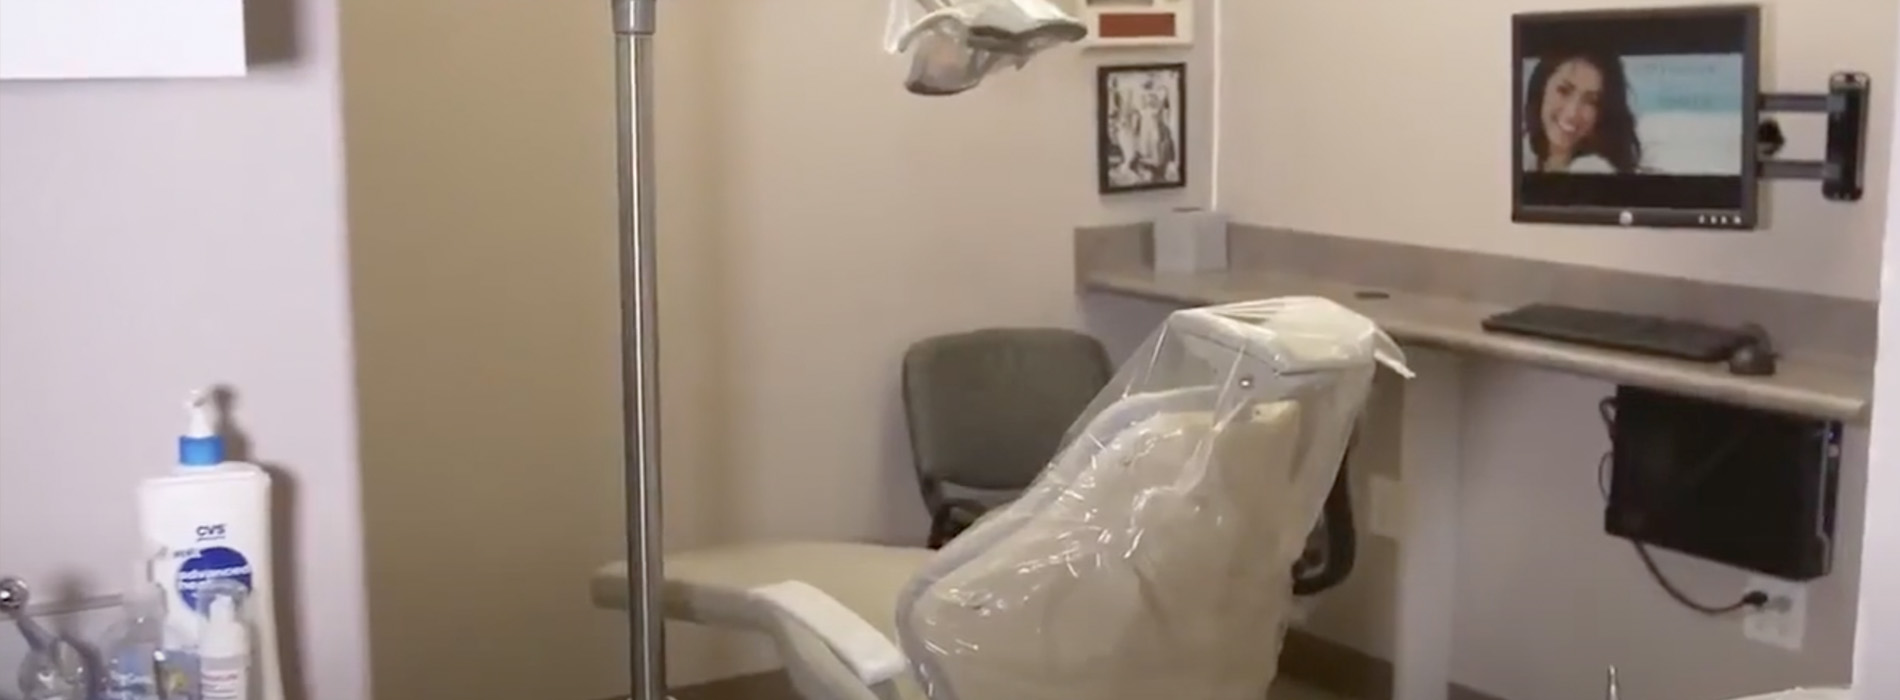 The image shows a dental chair in a small room with a monitor and a desk, suggesting a dental office setting.